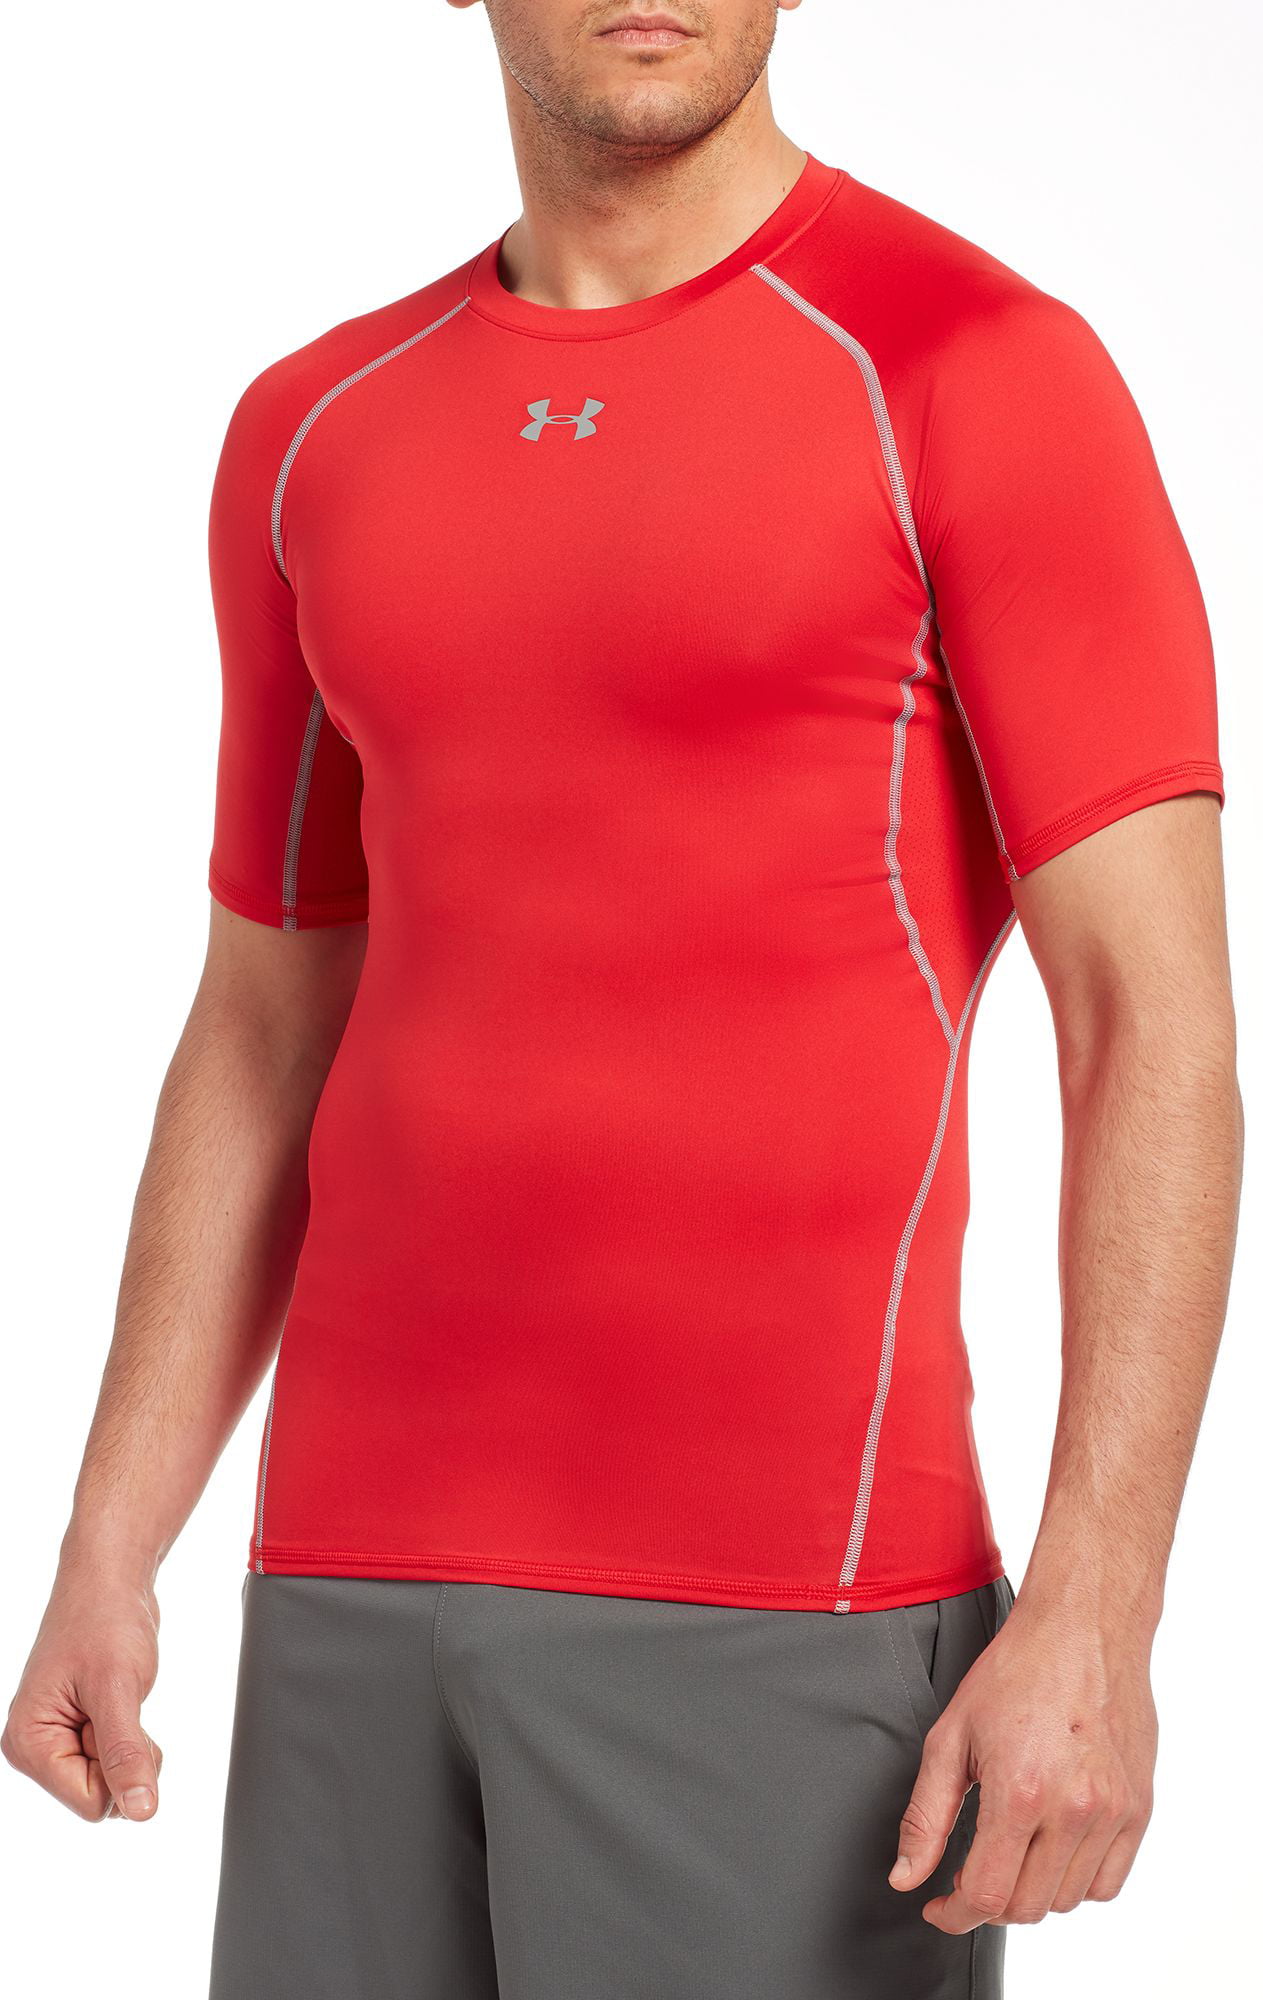 under armour 1257468 men's red heatgear s/s compression shirt - size x-large